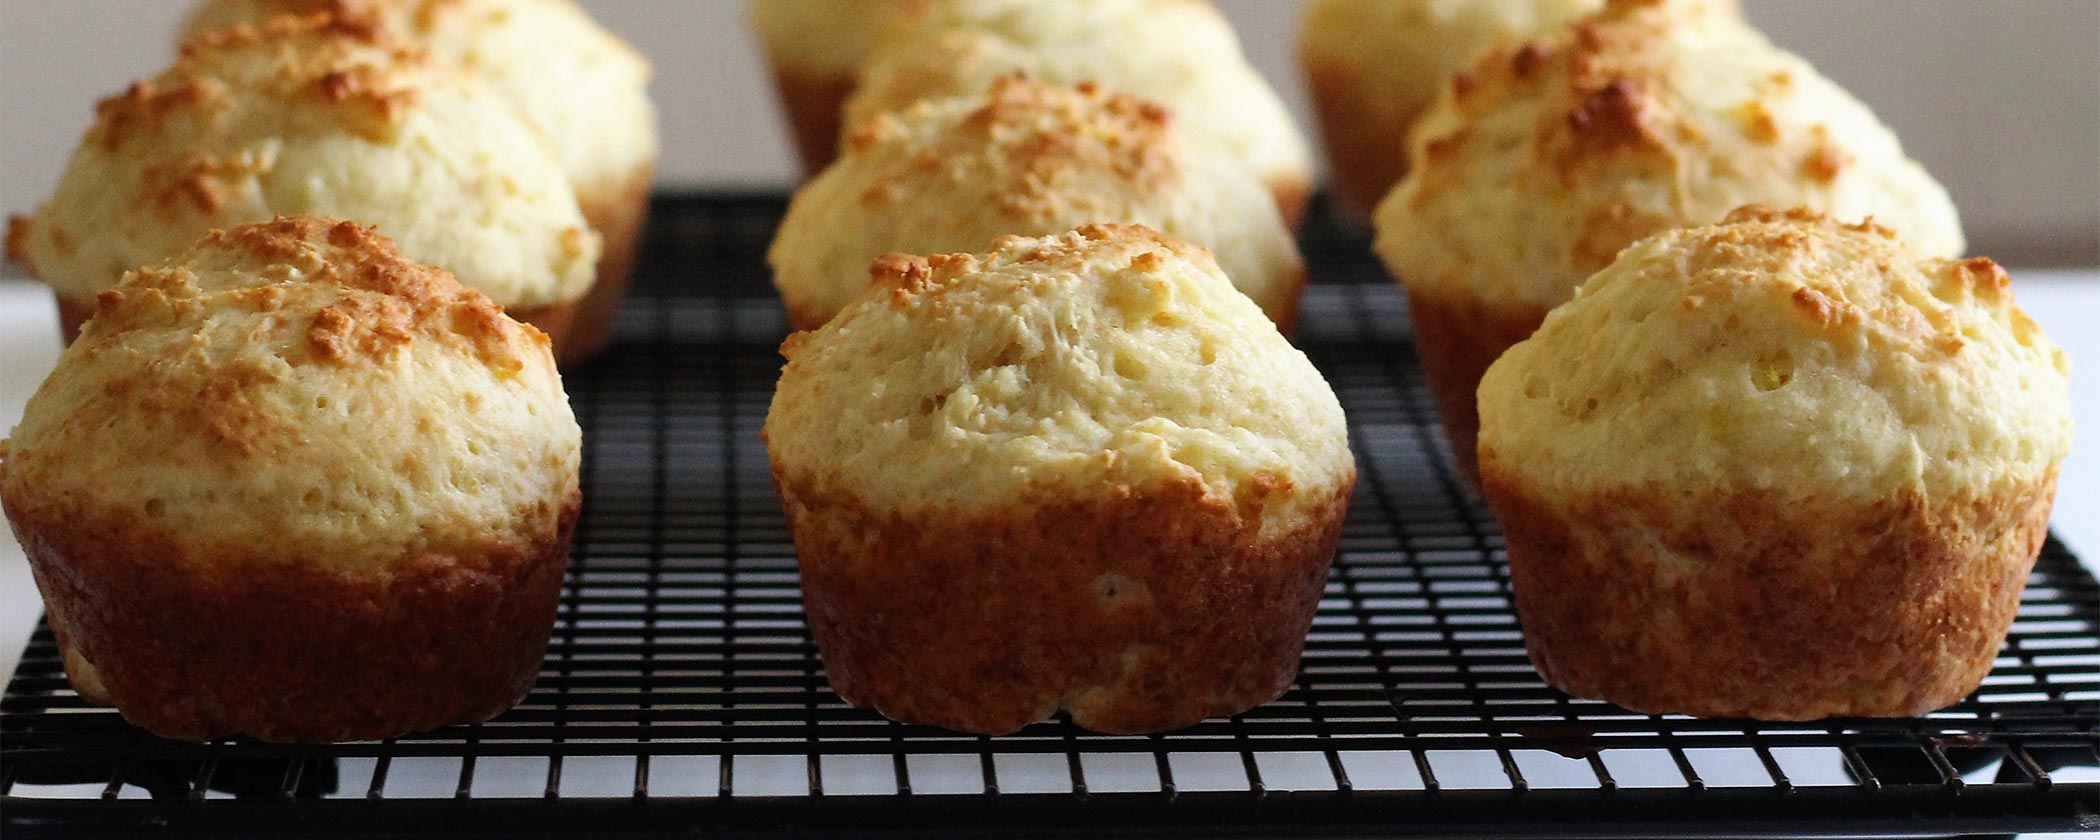 featured image for Mainely Dish: Low-Fat Lemon Yogurt Muffins